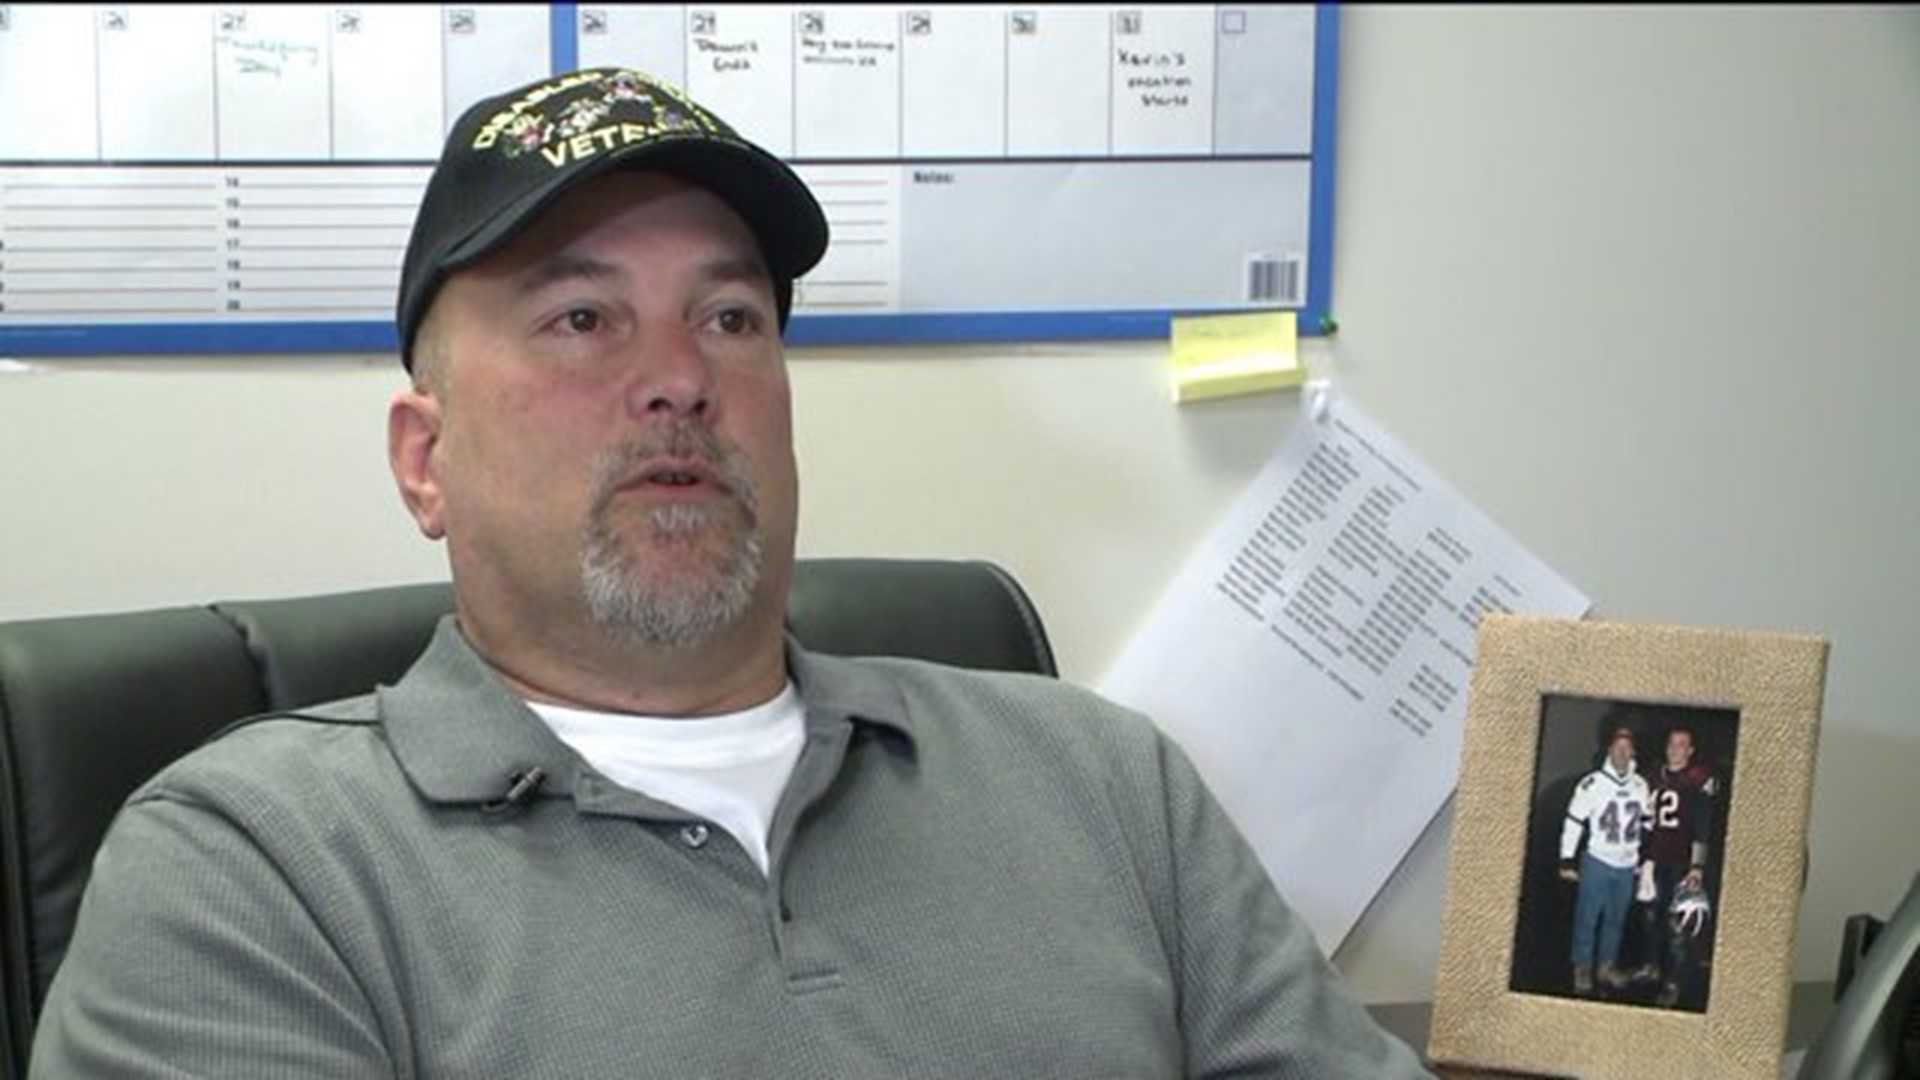 Veterans suffer as alleged scams continue in VA